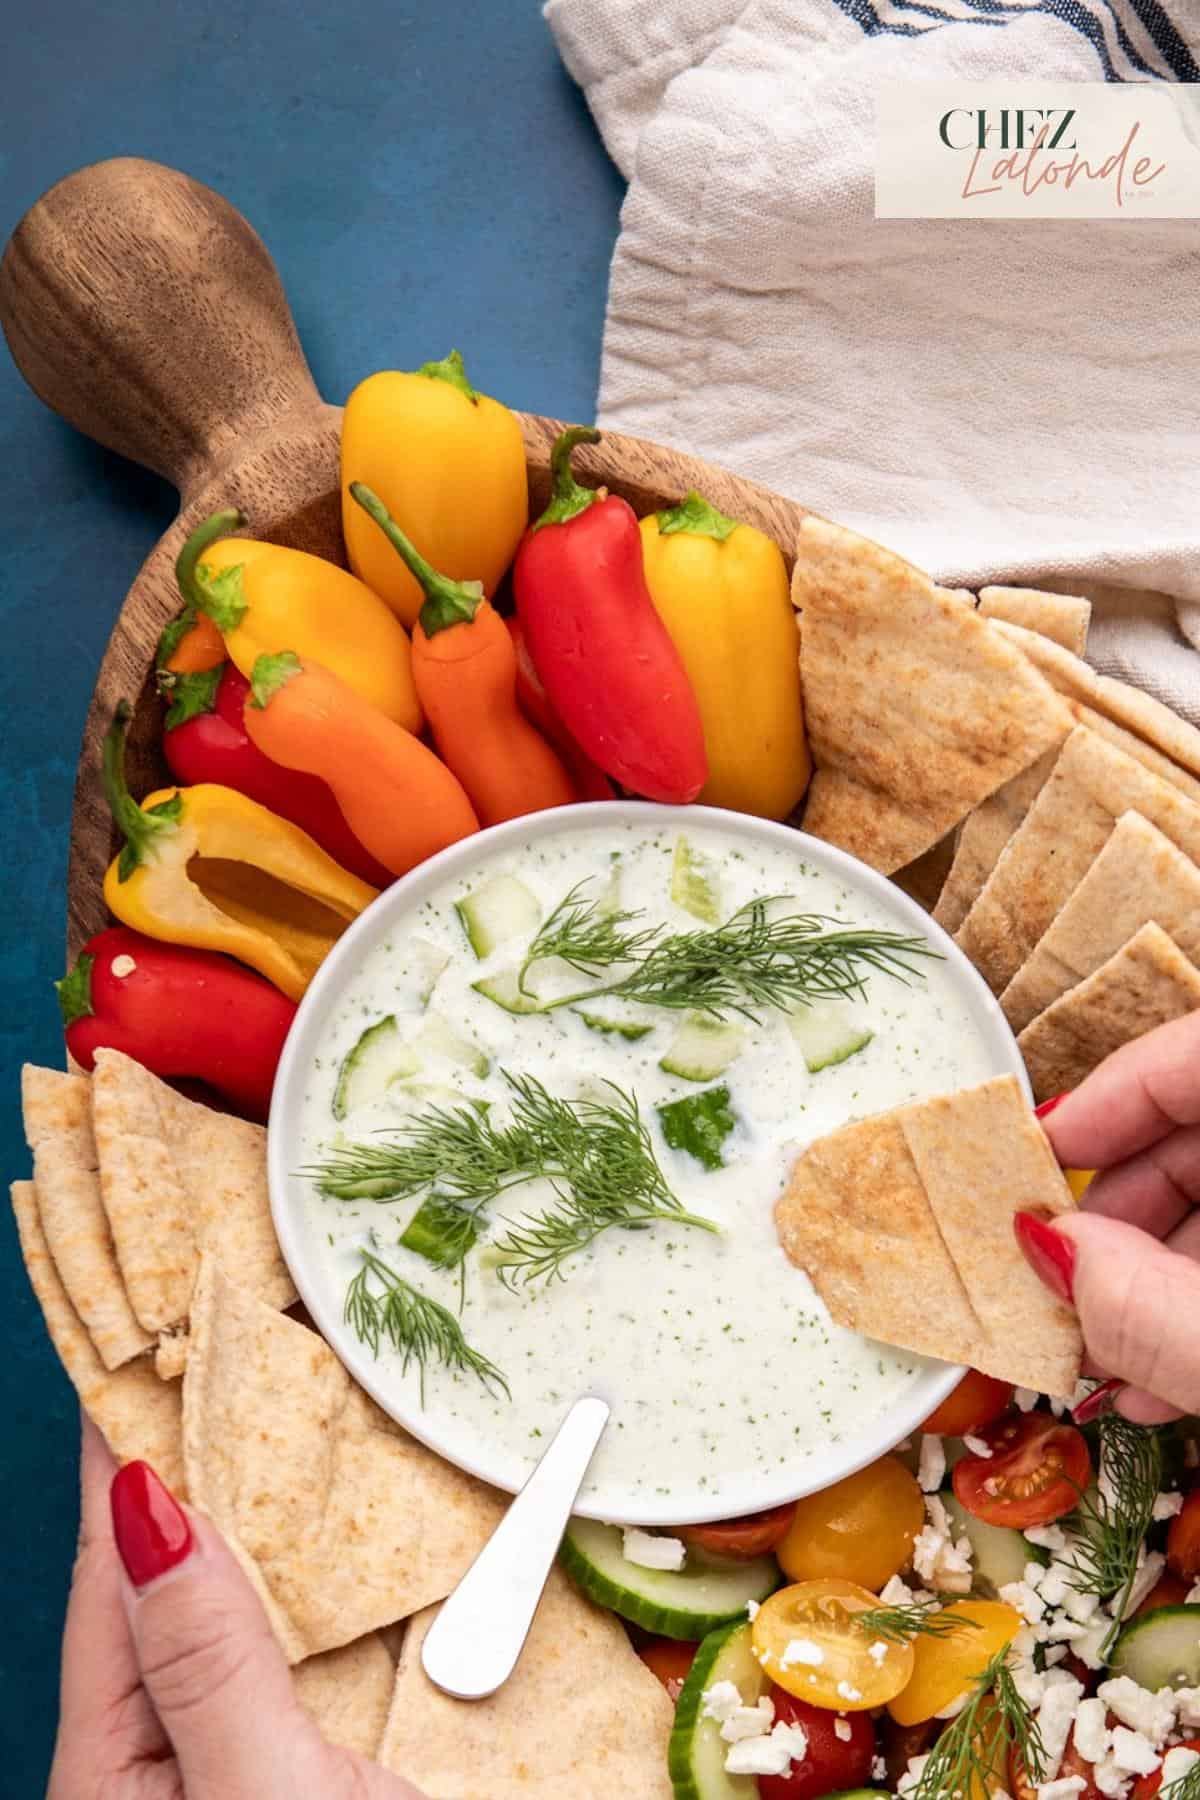 A bowl of tangy Tzatziki sauce with Pita bread and fresh peppers. Garnished with Dill and cucumbers.